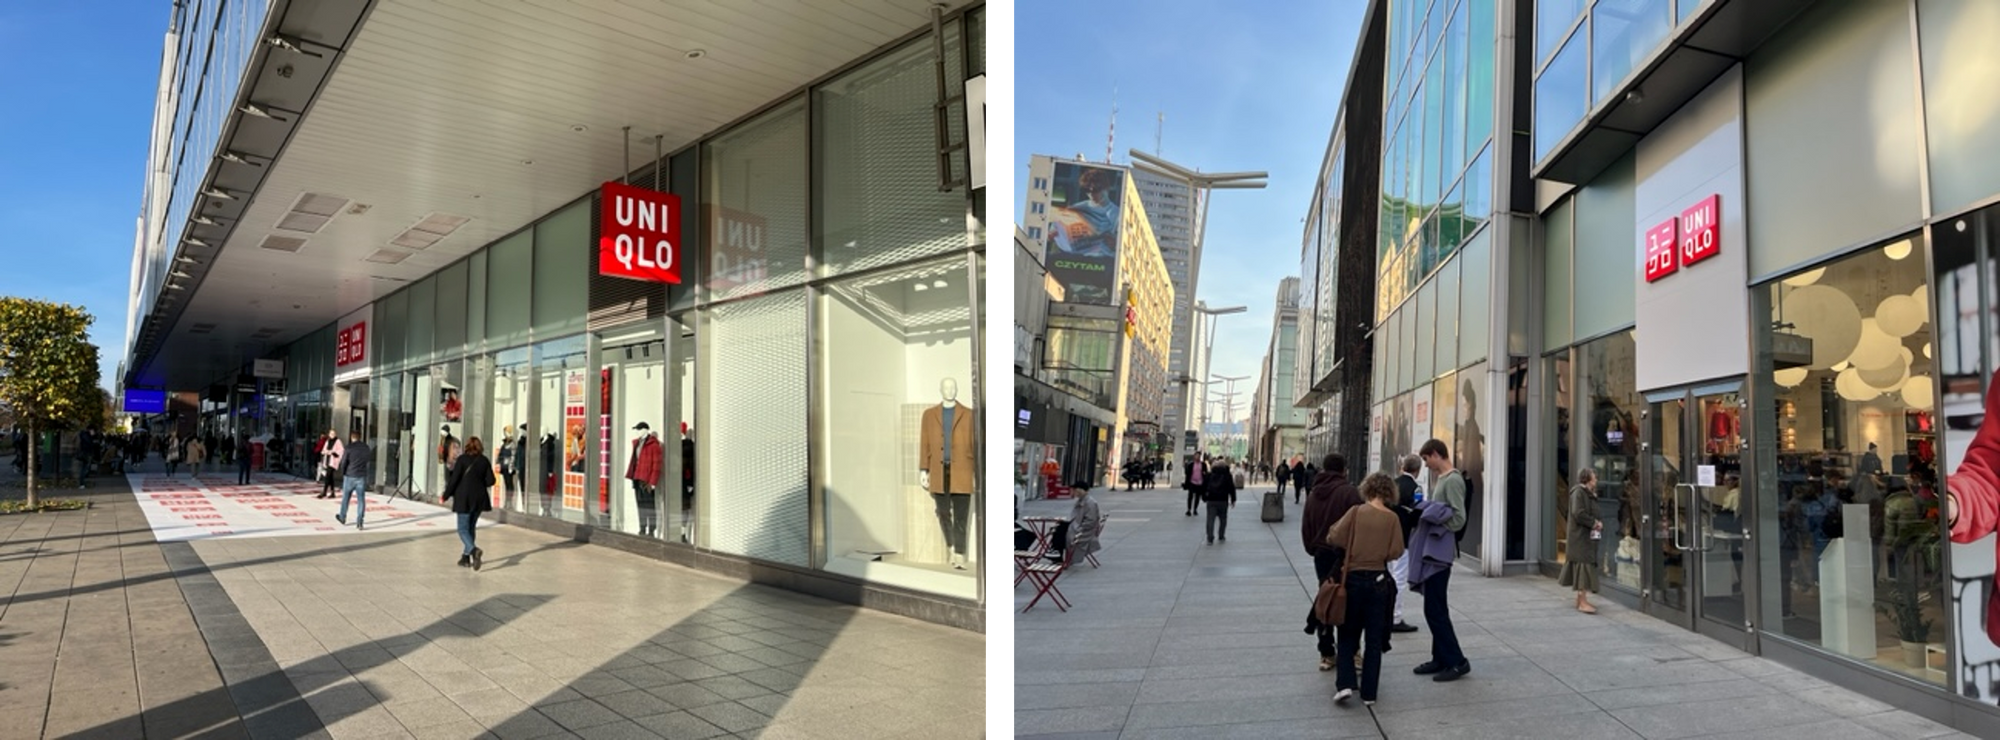 Uniqlo store frontage in Warsaw